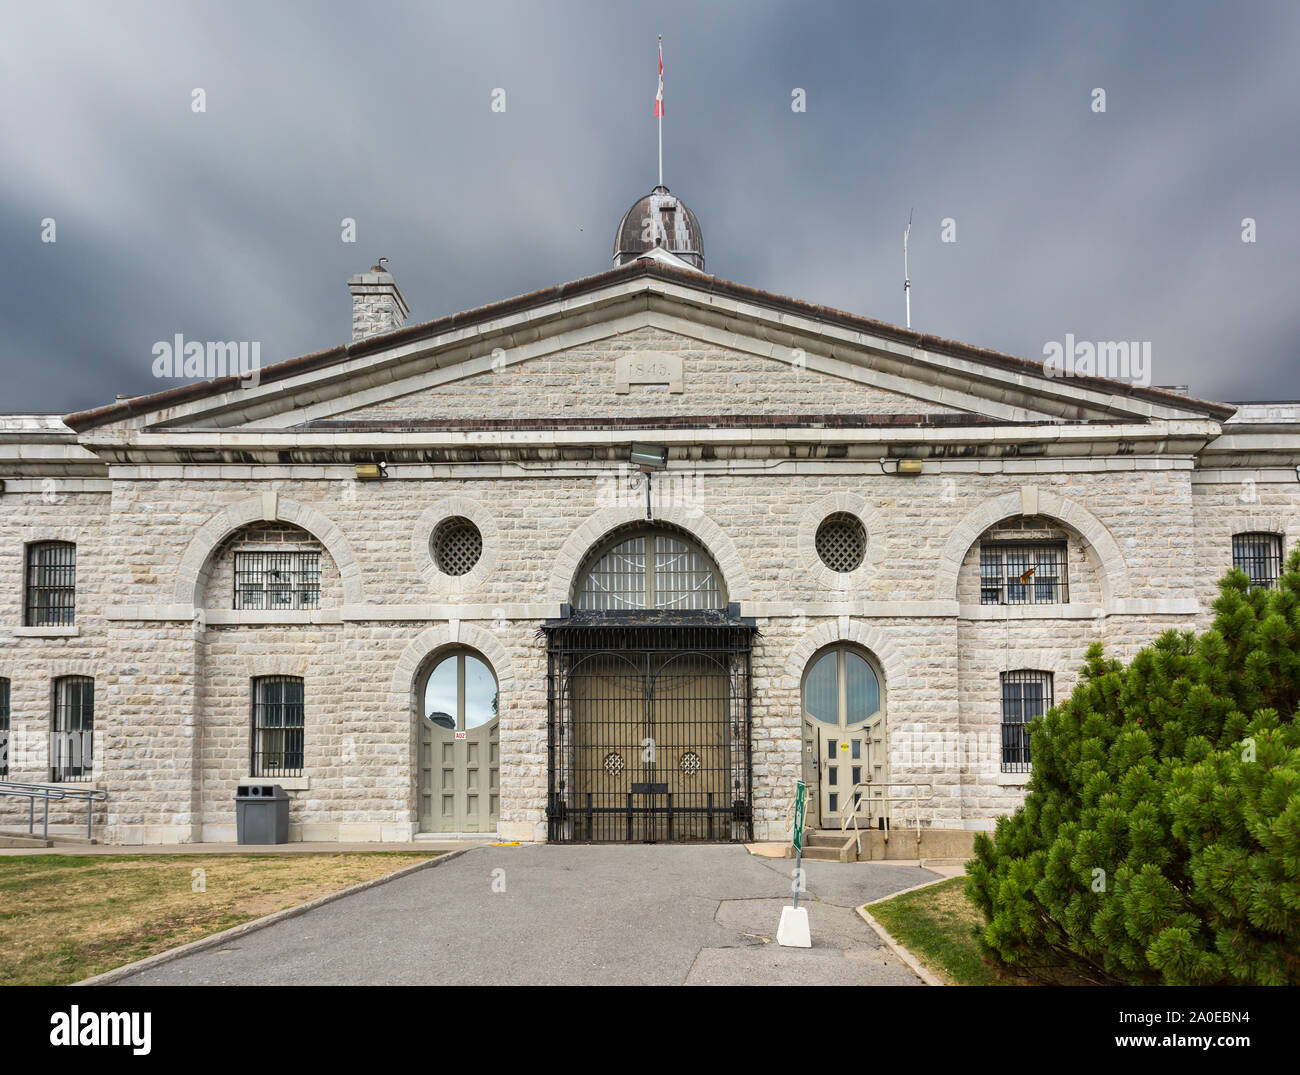 Kingston Penitentiary is a former maximum security prison that opened June 1835 and closed September 2013 now open for Jailhouse Tours Ontario Canada Stock Photo